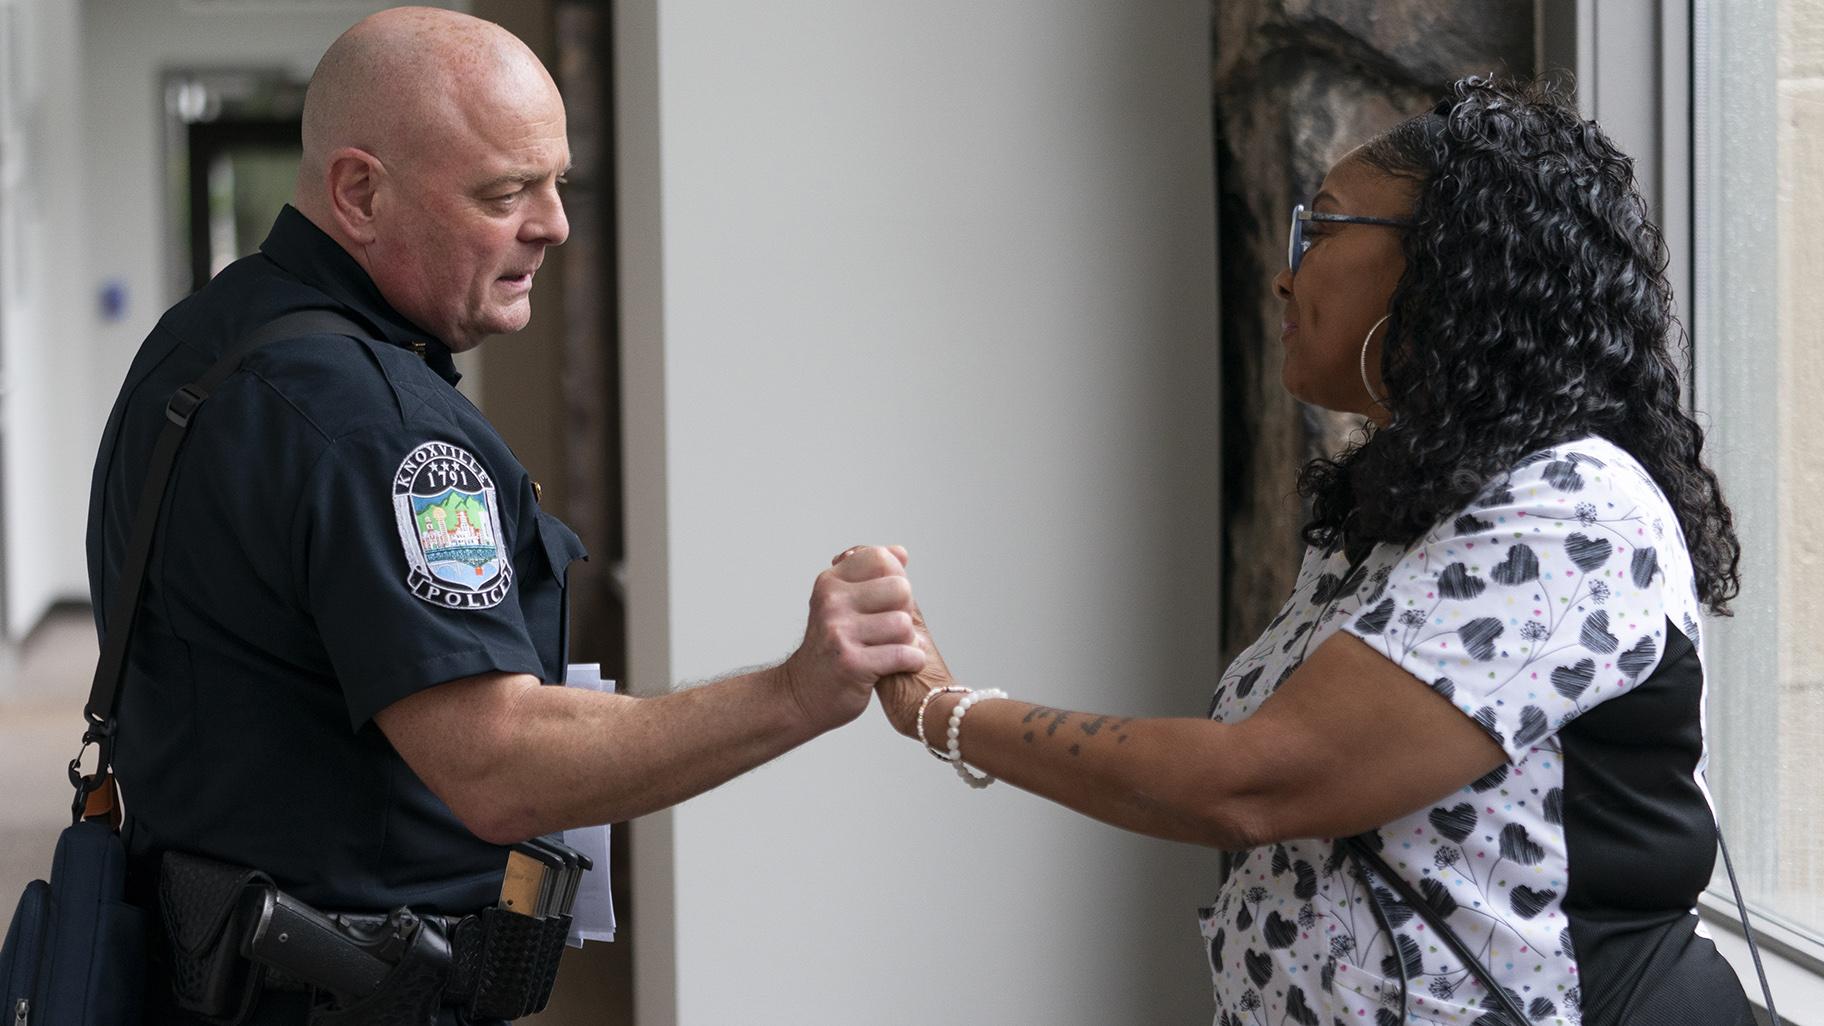 Knoxville Deputy Police Chief Tony Willis talks with Terry Walker-Smith after a meeting of the Violence Reduction Leadership Committee on Thursday, Aug. 3, 2023, in Knoxville, Tenn. The city saw a spike in gun deaths in 2020 and 2021, with a gun homicide rate that at one point in 2021 rivaled Chicago’s. (AP Photo / George Walker IV)